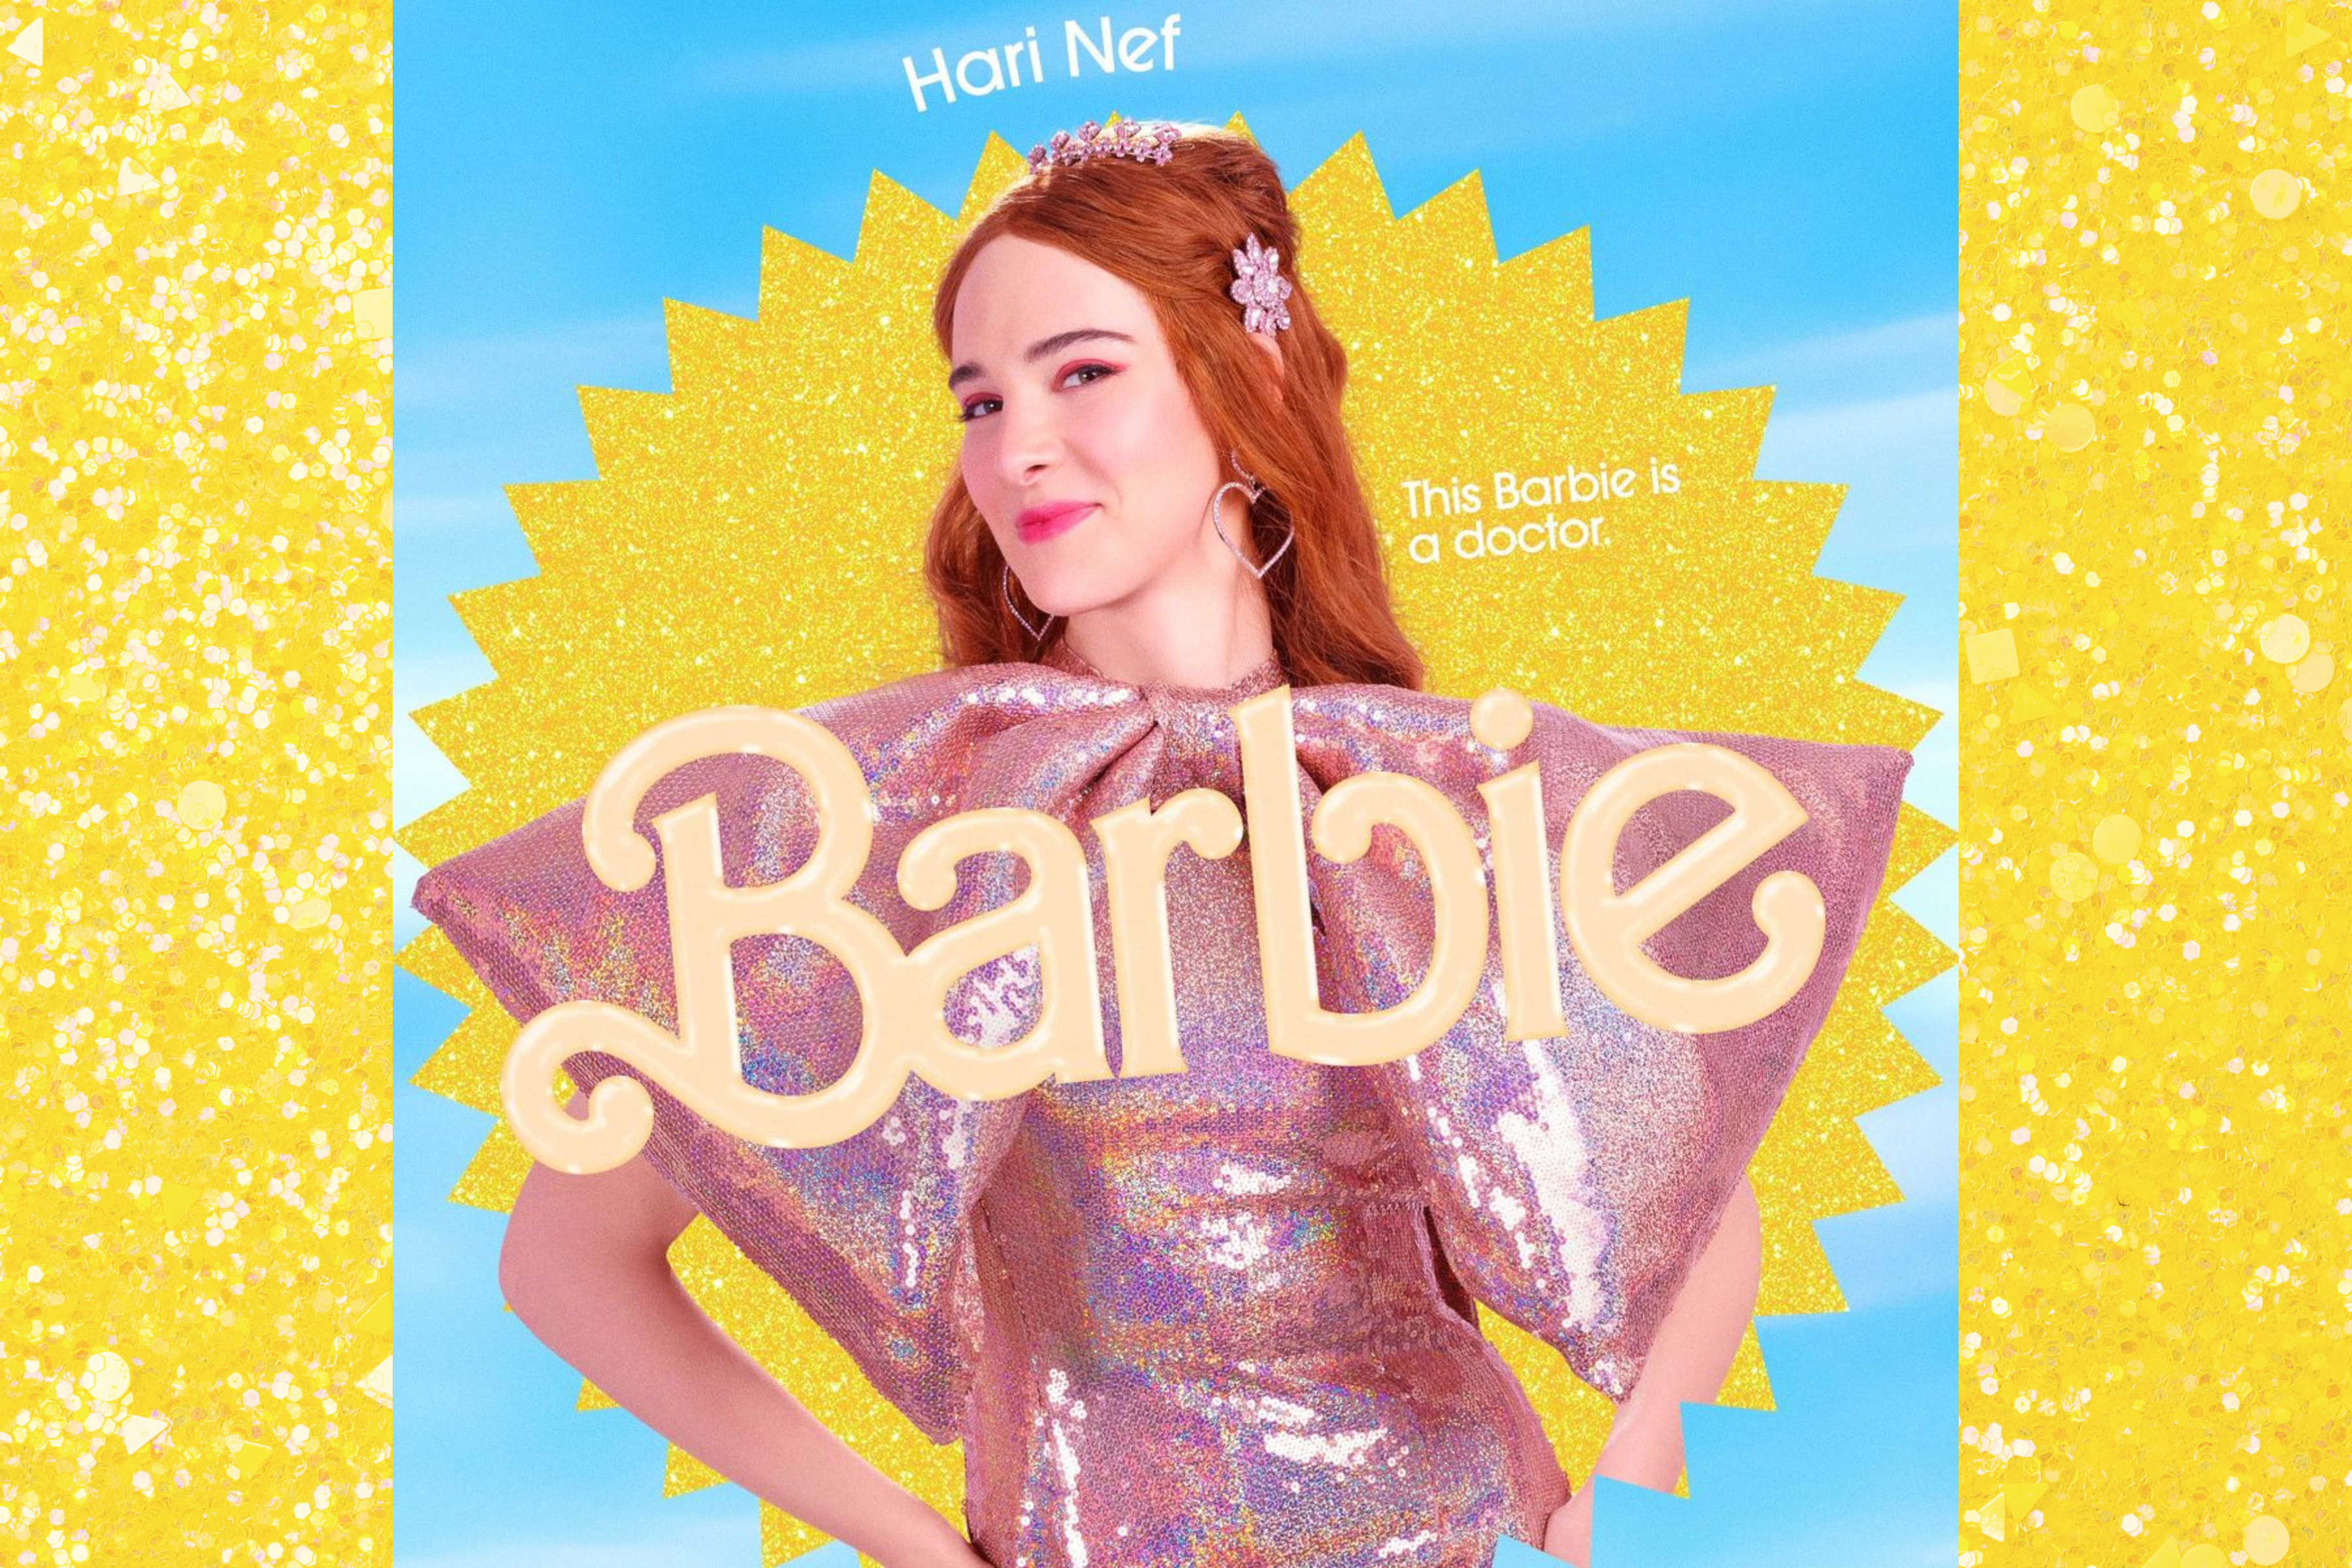 Hari Nef in Barbie draws criticism from far-right conservatives photo